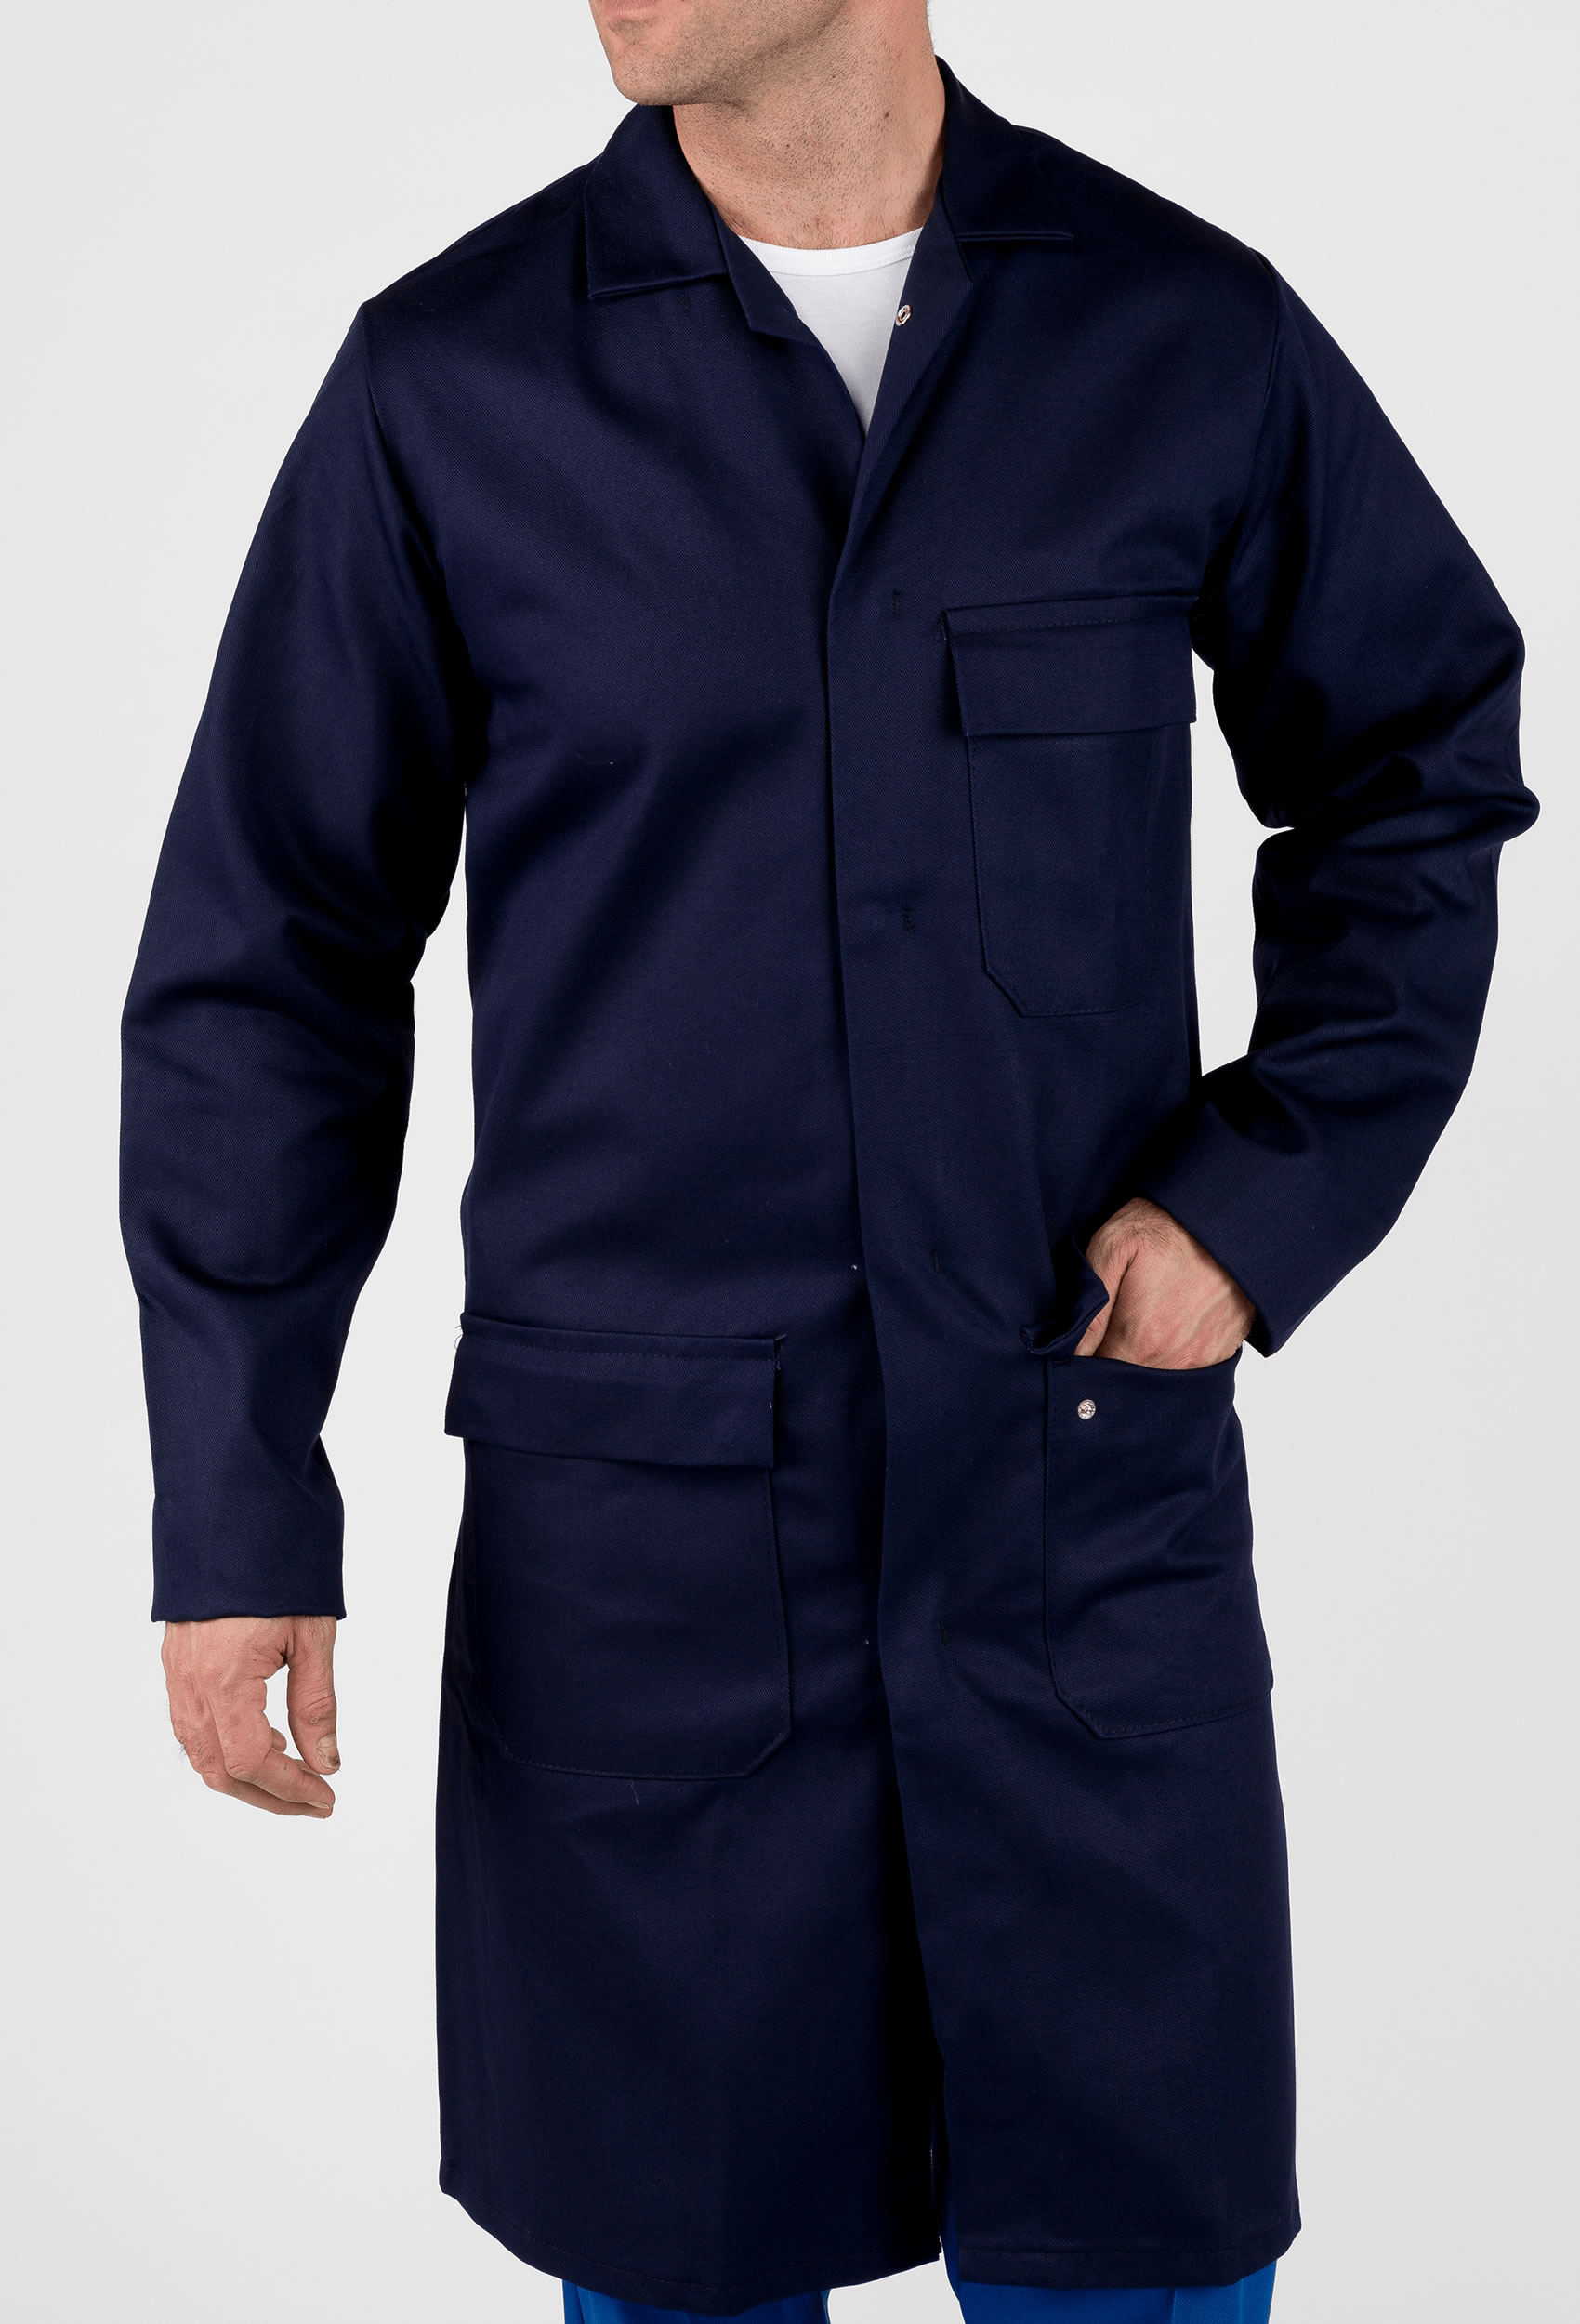 Style 153 Proban Cotton Drill Coat.jpg - Workwear Garments - CLEAN Services